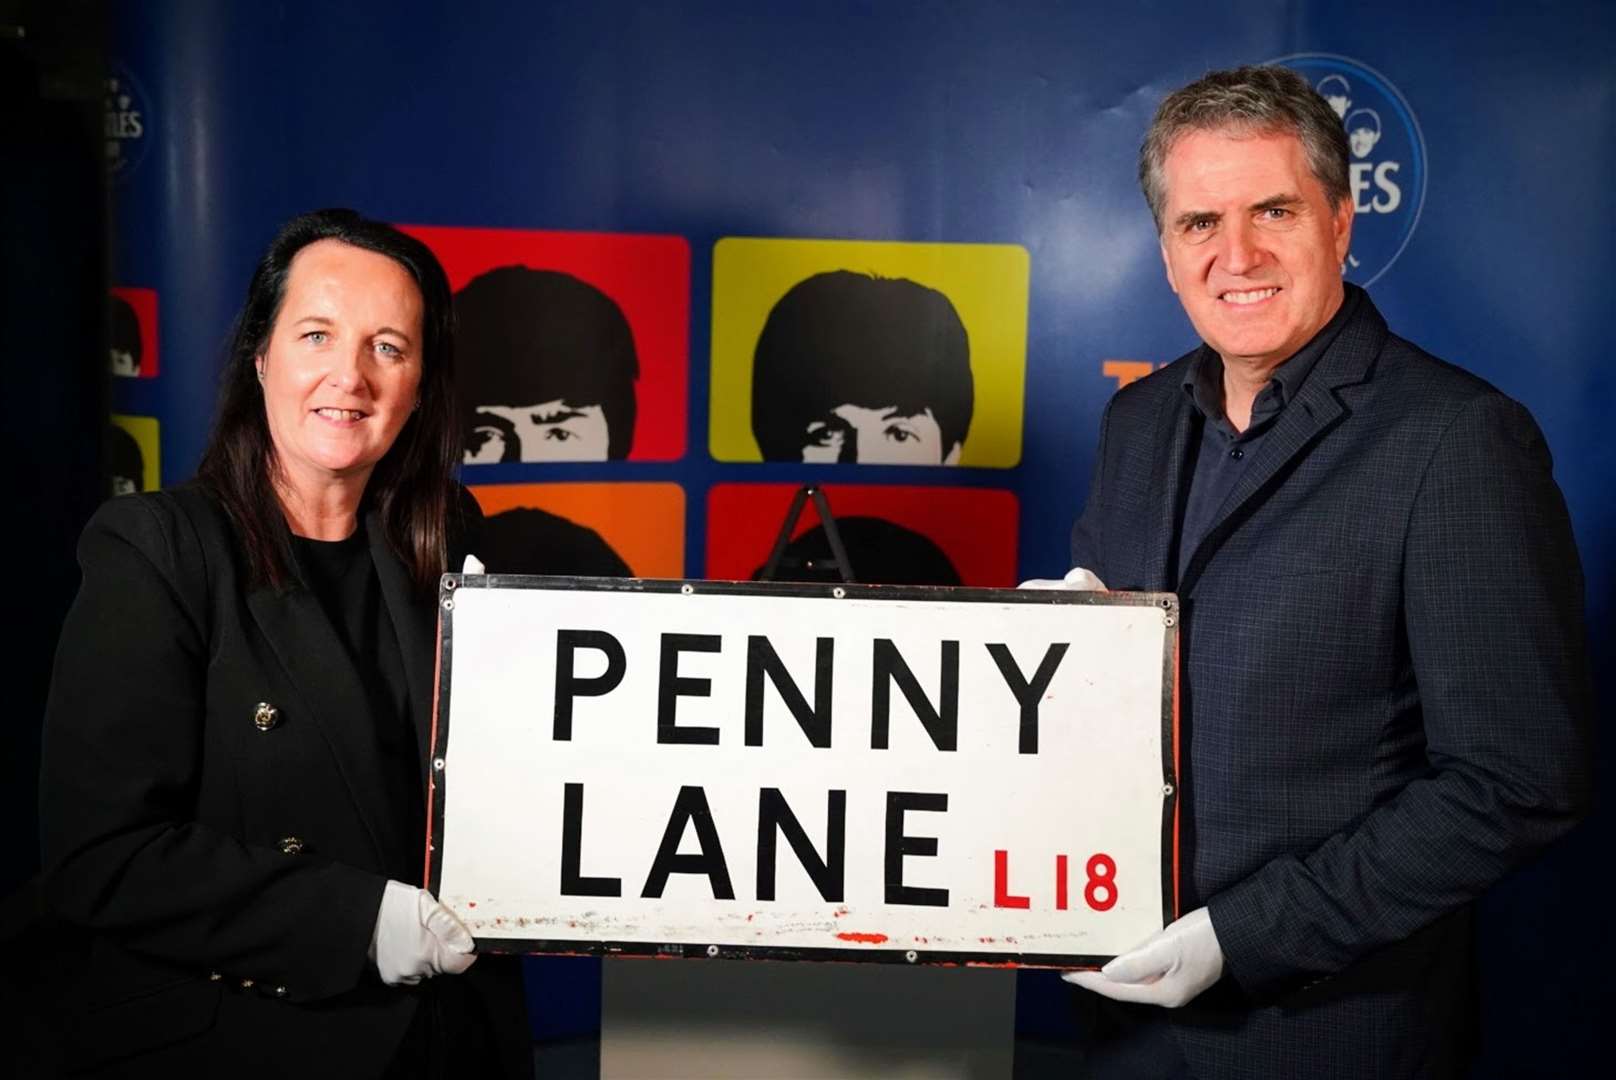 The sign will go on display in The Beatles Story museum (Kevin Matthews/PA)